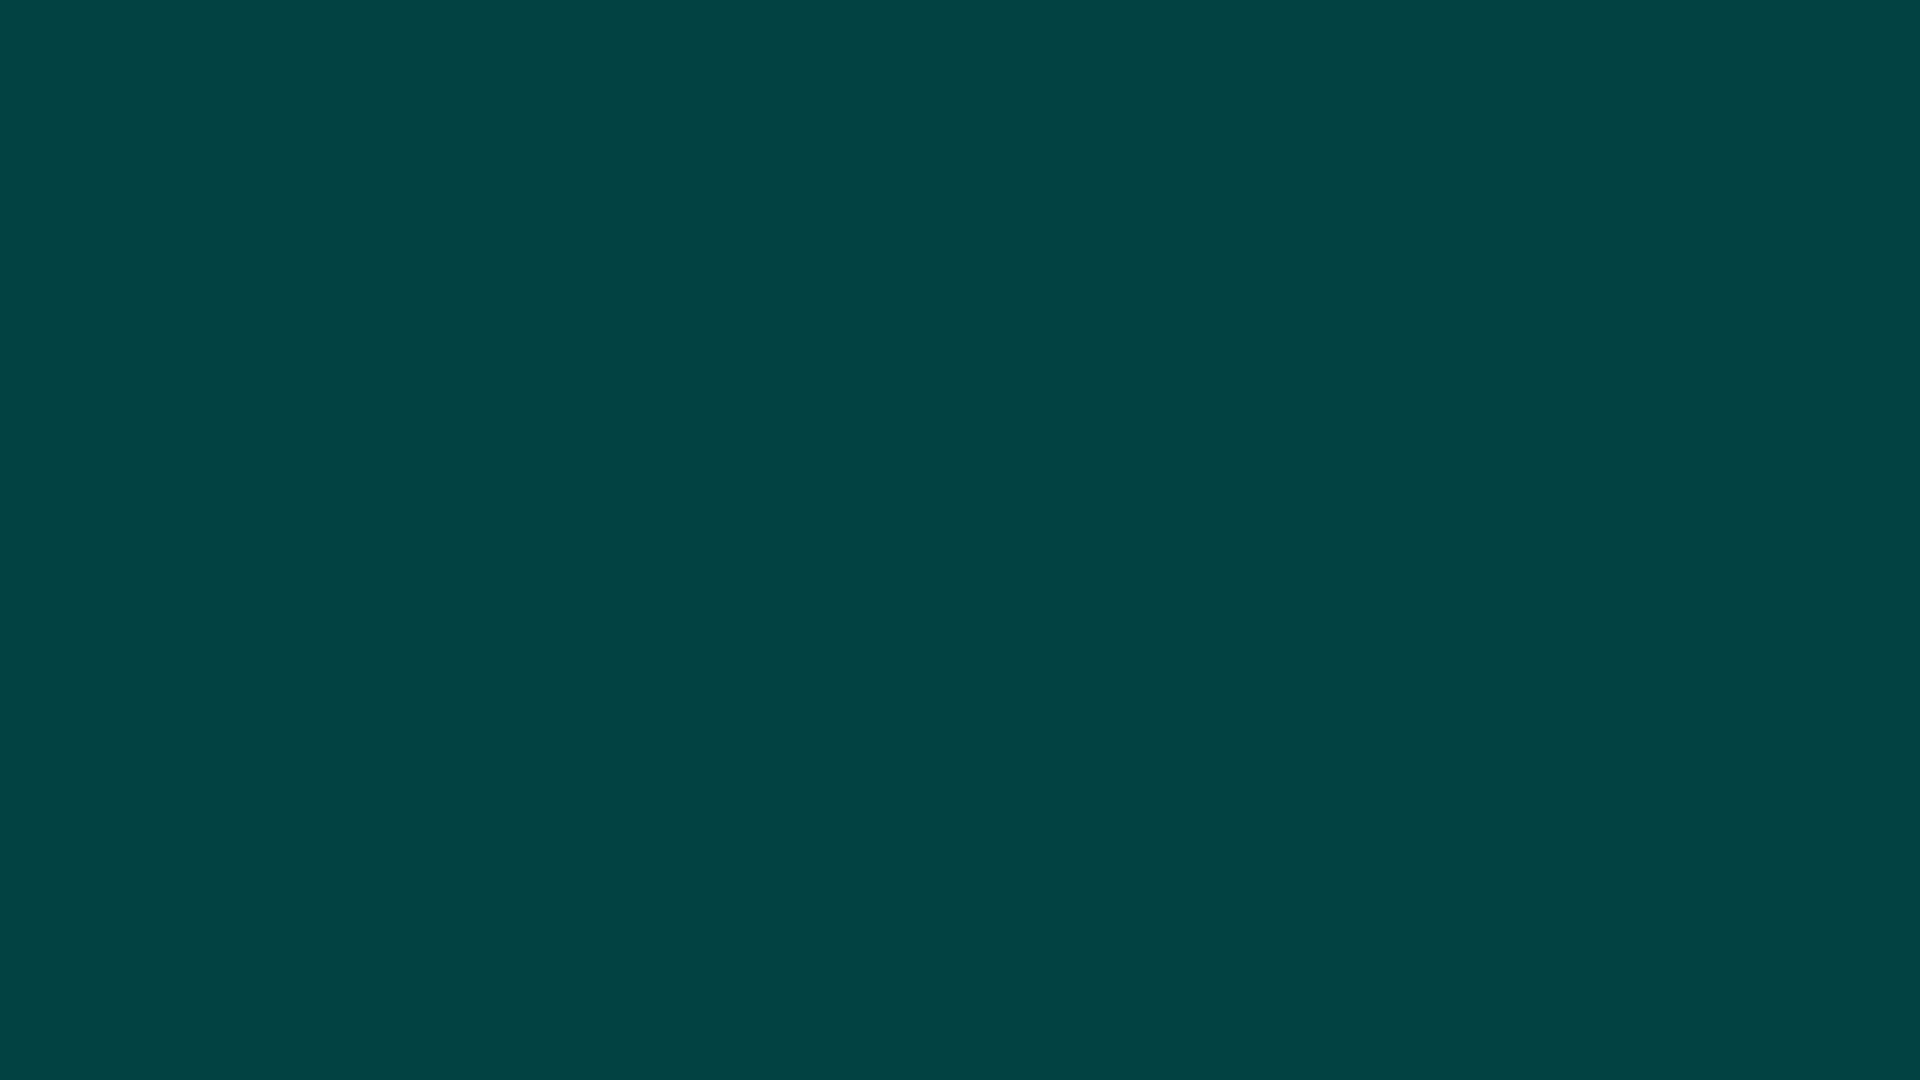 a dark green background with a white background